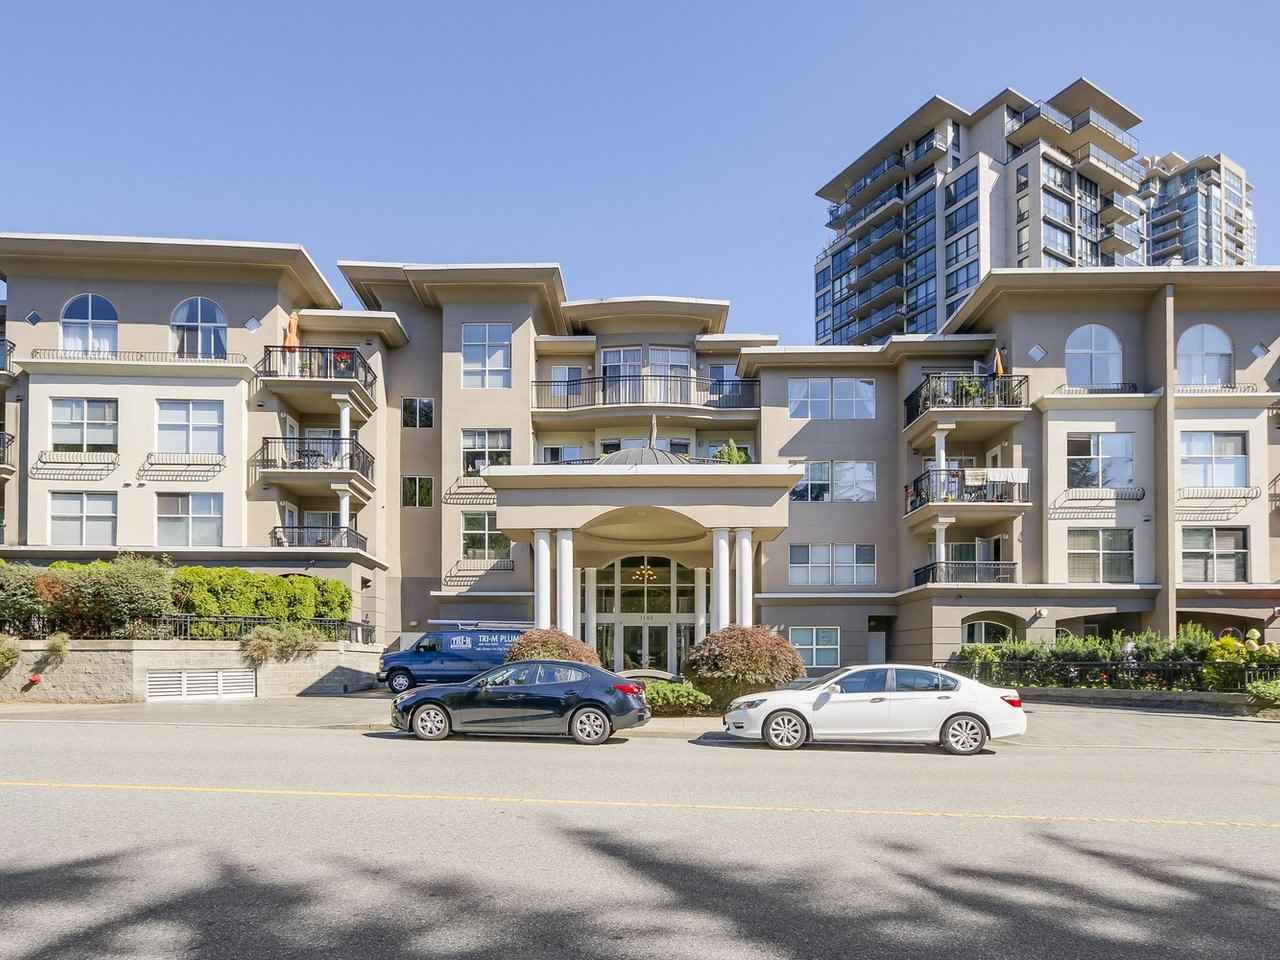 Main Photo: 309 1185 PACIFIC Street in Coquitlam: North Coquitlam Condo for sale : MLS®# R2197570